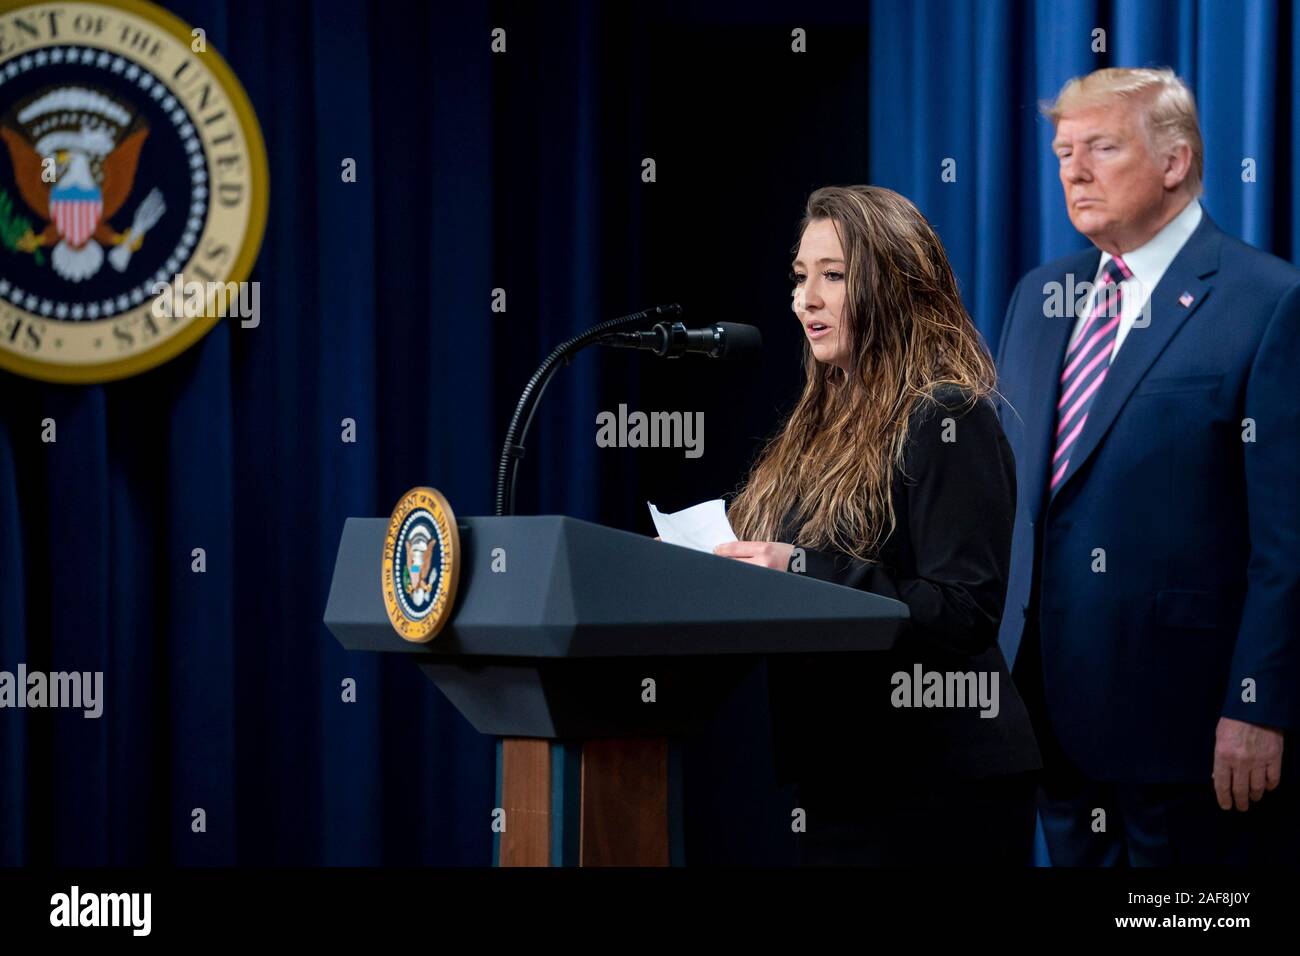 Washington DC, USA. 12 December, 2019. U.S President Donald Trump listens as Brittany Hasemann of Colorado, delivers remarks at the White House Summit on Child Care and Paid Leave: Supporting America’s Working Families on in the South Court Auditorium of the Eisenhower Executive Office Building at the White House December 12, 2019 in Washington, DC. Credit: Tia Dufour/White House Photo/Alamy Live News Stock Photo